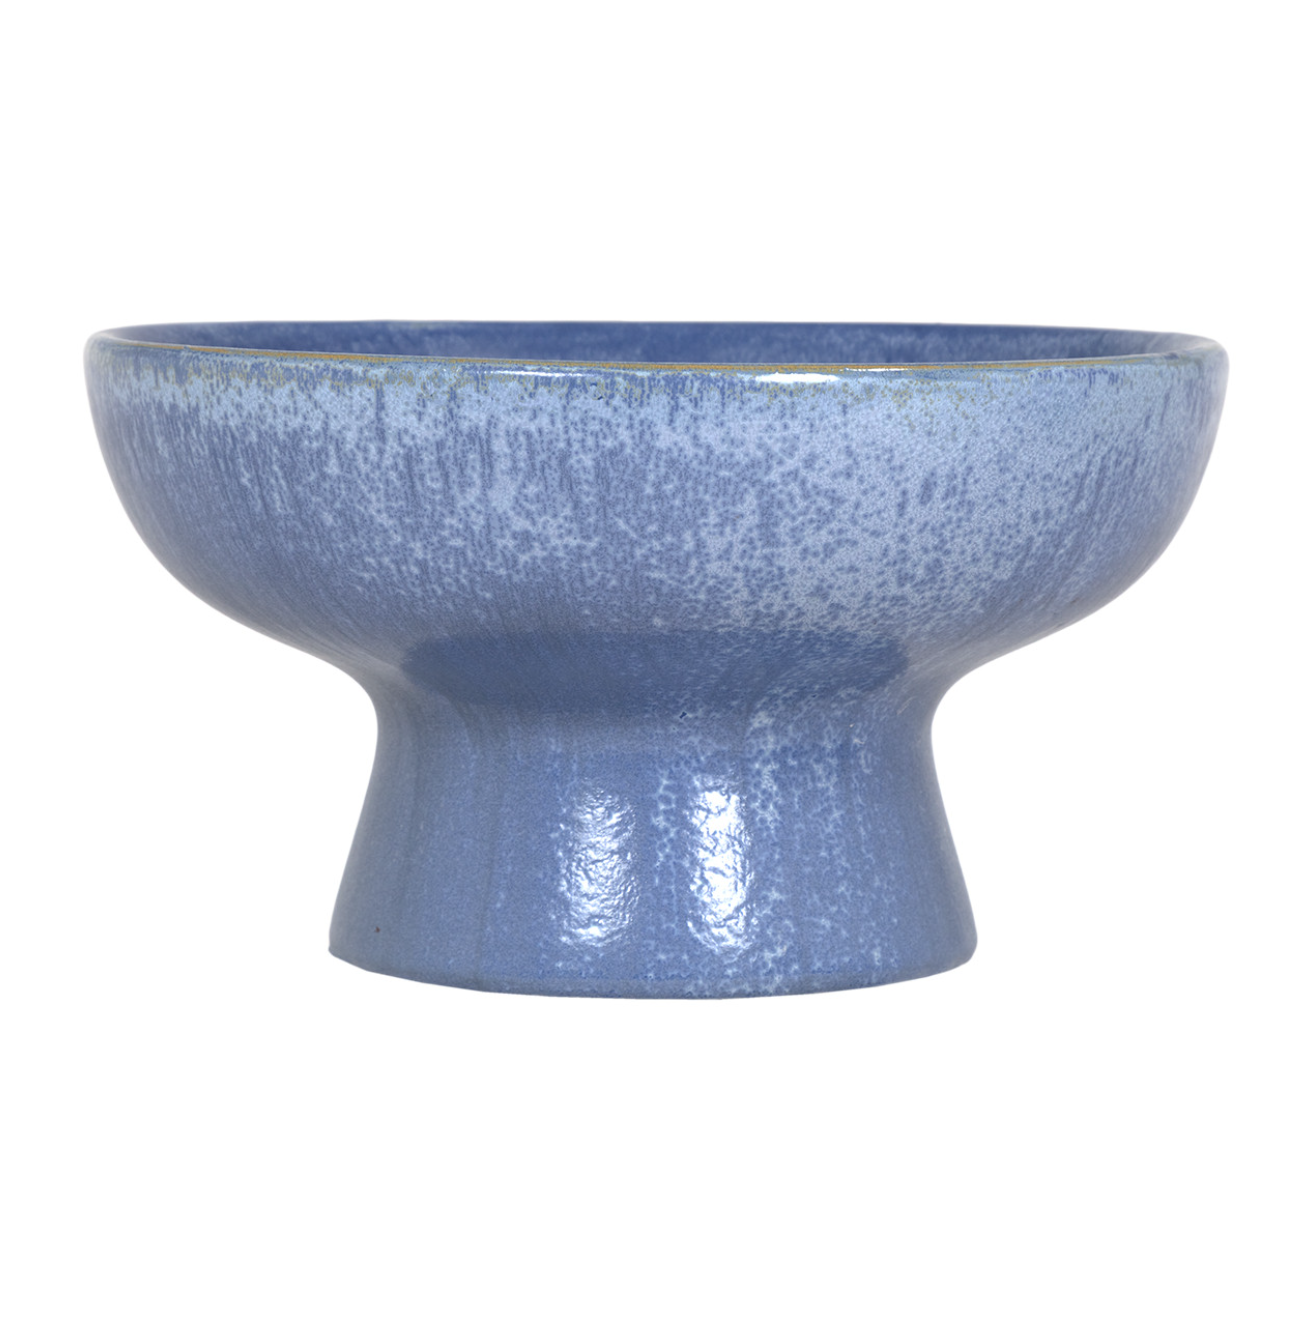 A blue ceramic Flynn Bowl with a textured, rustic glaze displayed against a white background. The bowl, reminiscent of a Scottsdale Arizona bungalow style, has a wide rim and a sturdy base by The Import Collection.